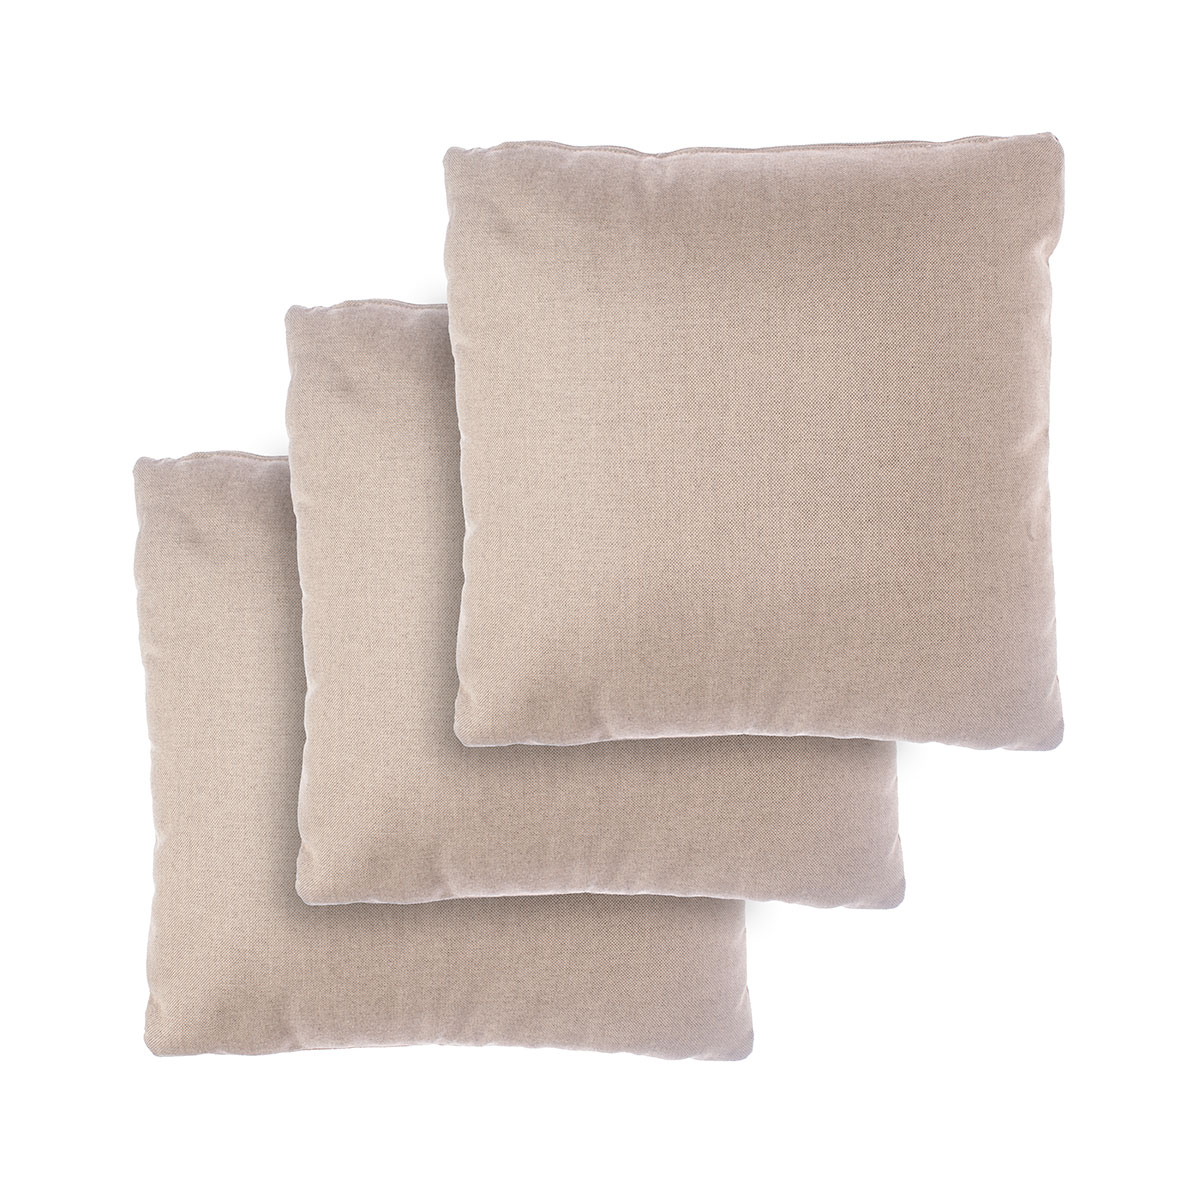 Set of 3 small pillows for 3-seater sofa Zoe Braid